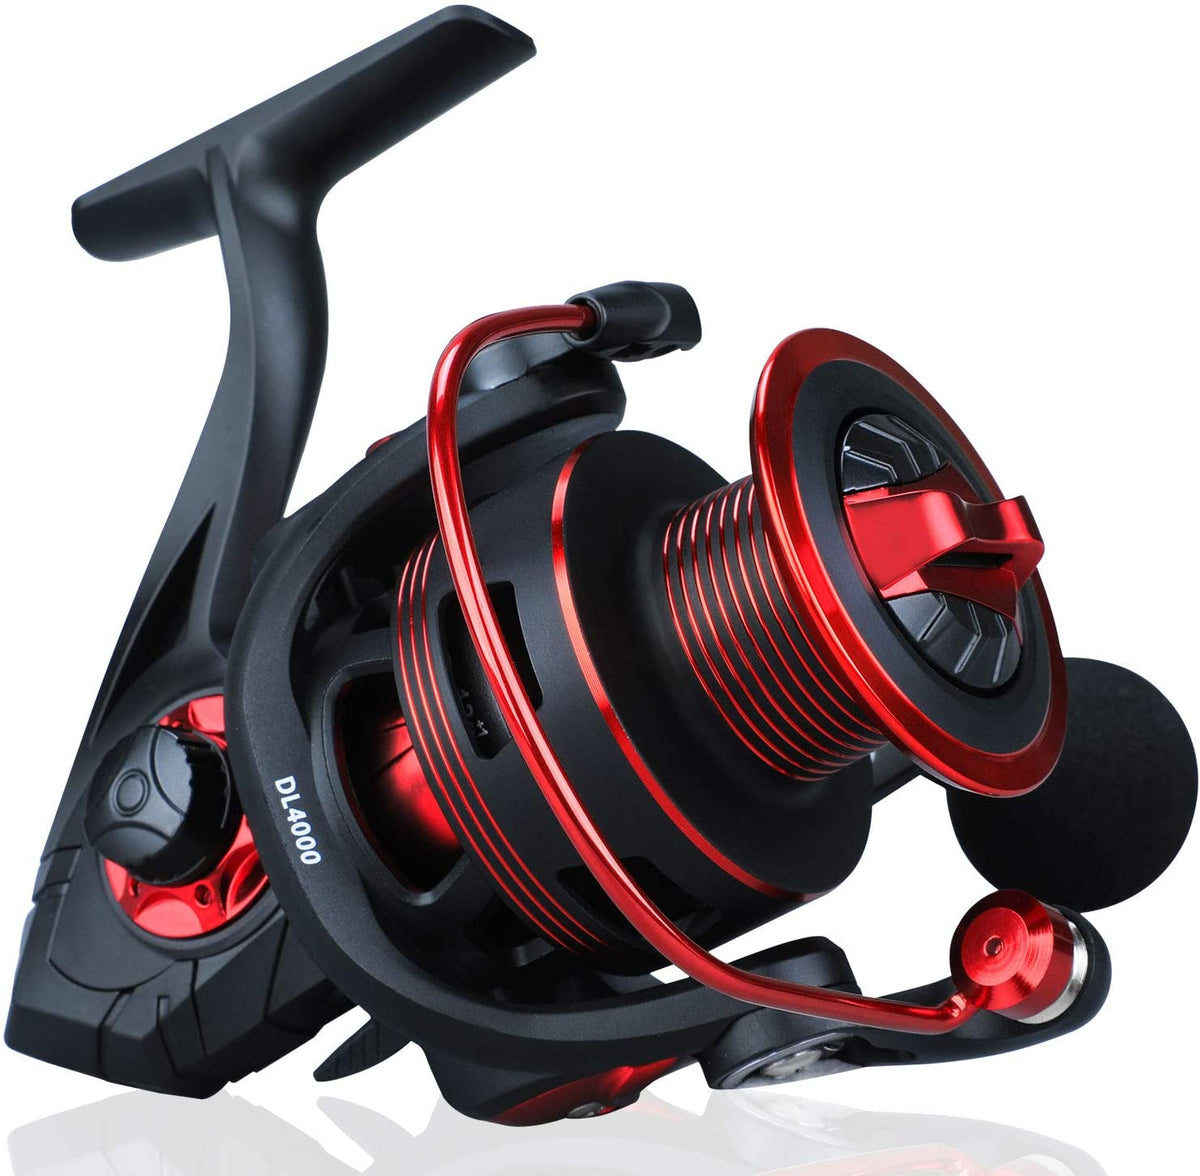 PLUSINNO GG Spinning Reel, High Speed Fishing Reels with 5.1:1 - 5.7:1 Gear  Ratio, 22-30 LB Powerful Drag System, 9+1BB Ultra Smooth Powerful, Ultralight  Spinning Reels for Freshwater and Saltwater : 